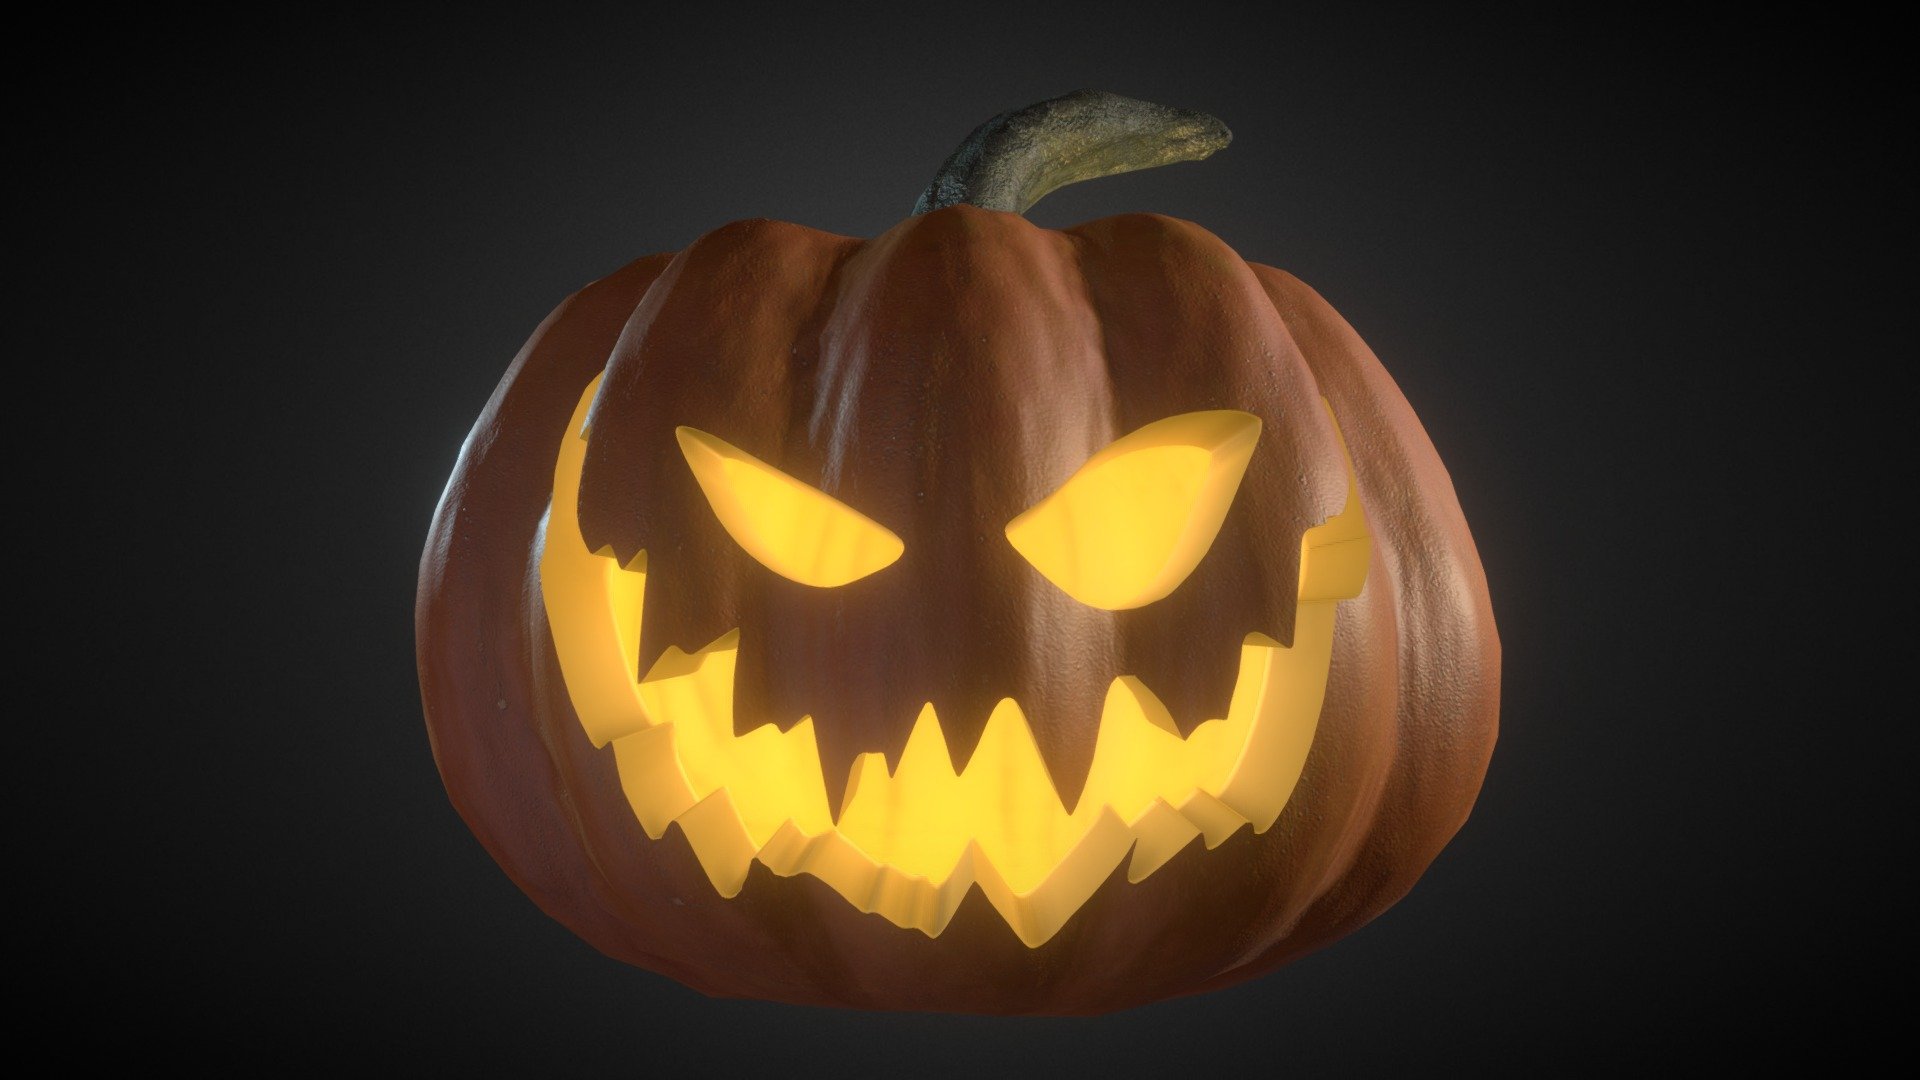 Realistic model of a halloween Jack-o-lantern with good mesh topology (no triangles, no ngons). 
Model has only 1 object with 2 materials: 
-Halloween_Pumpkin (textured) 
-Halloween_Pumpkin_inside (no textures) 
Textures assigned to 1 UV map are: 
-colormap 2048x2048 (.png RBG 8-bit) 
-normalmap 2048x2048 (.png RBG 8-bit)
The mesh is made of 7352 quad polygons only.
Additional file &ldquo;Halloween_pumkin.zip